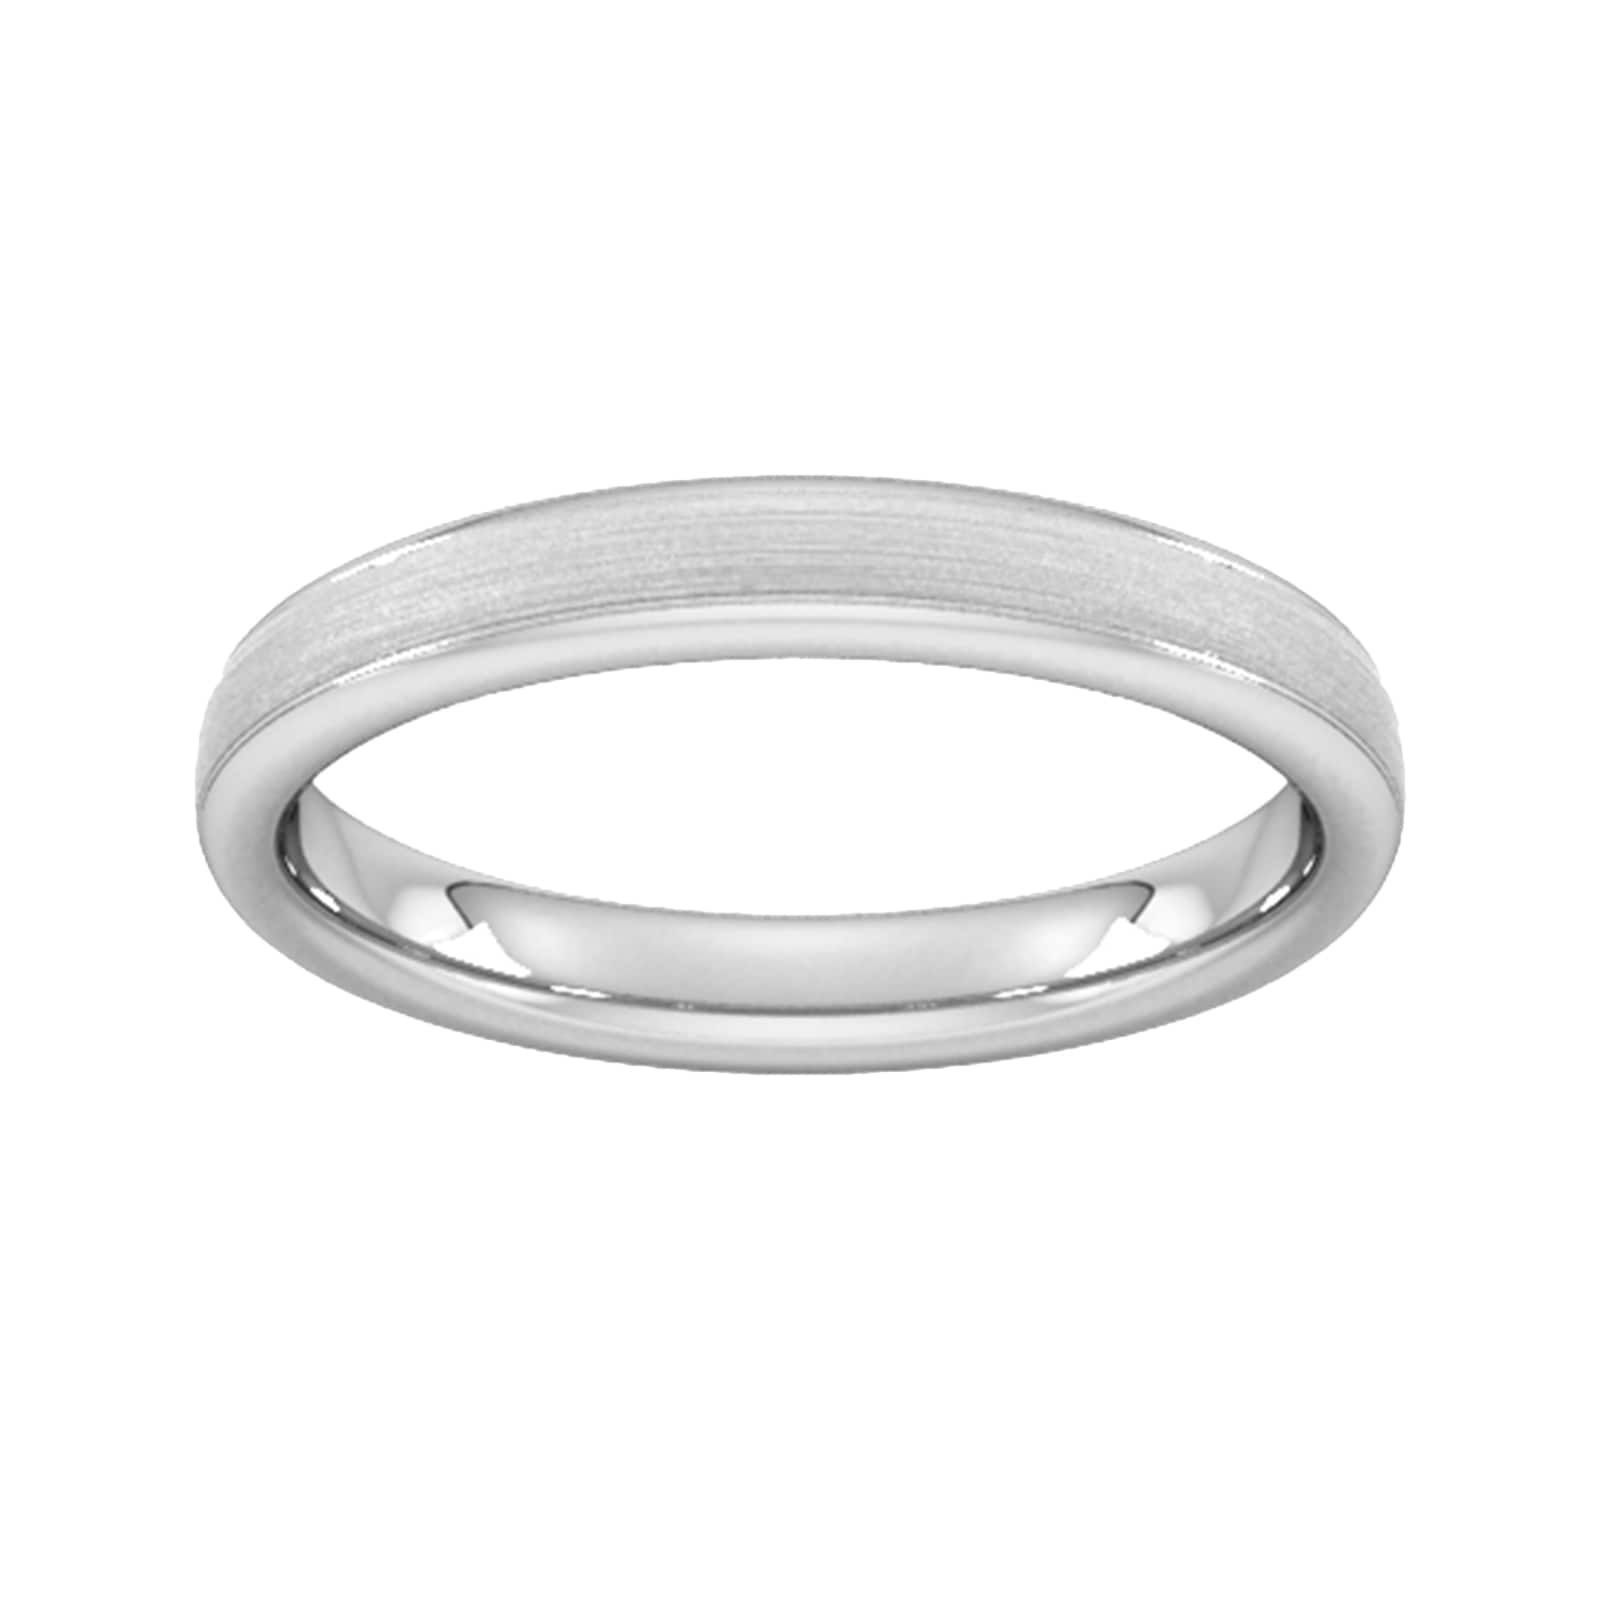 3mm Traditional Court Heavy Matt Centre With Grooves Wedding Ring In 9 Carat White Gold - Ring Size P